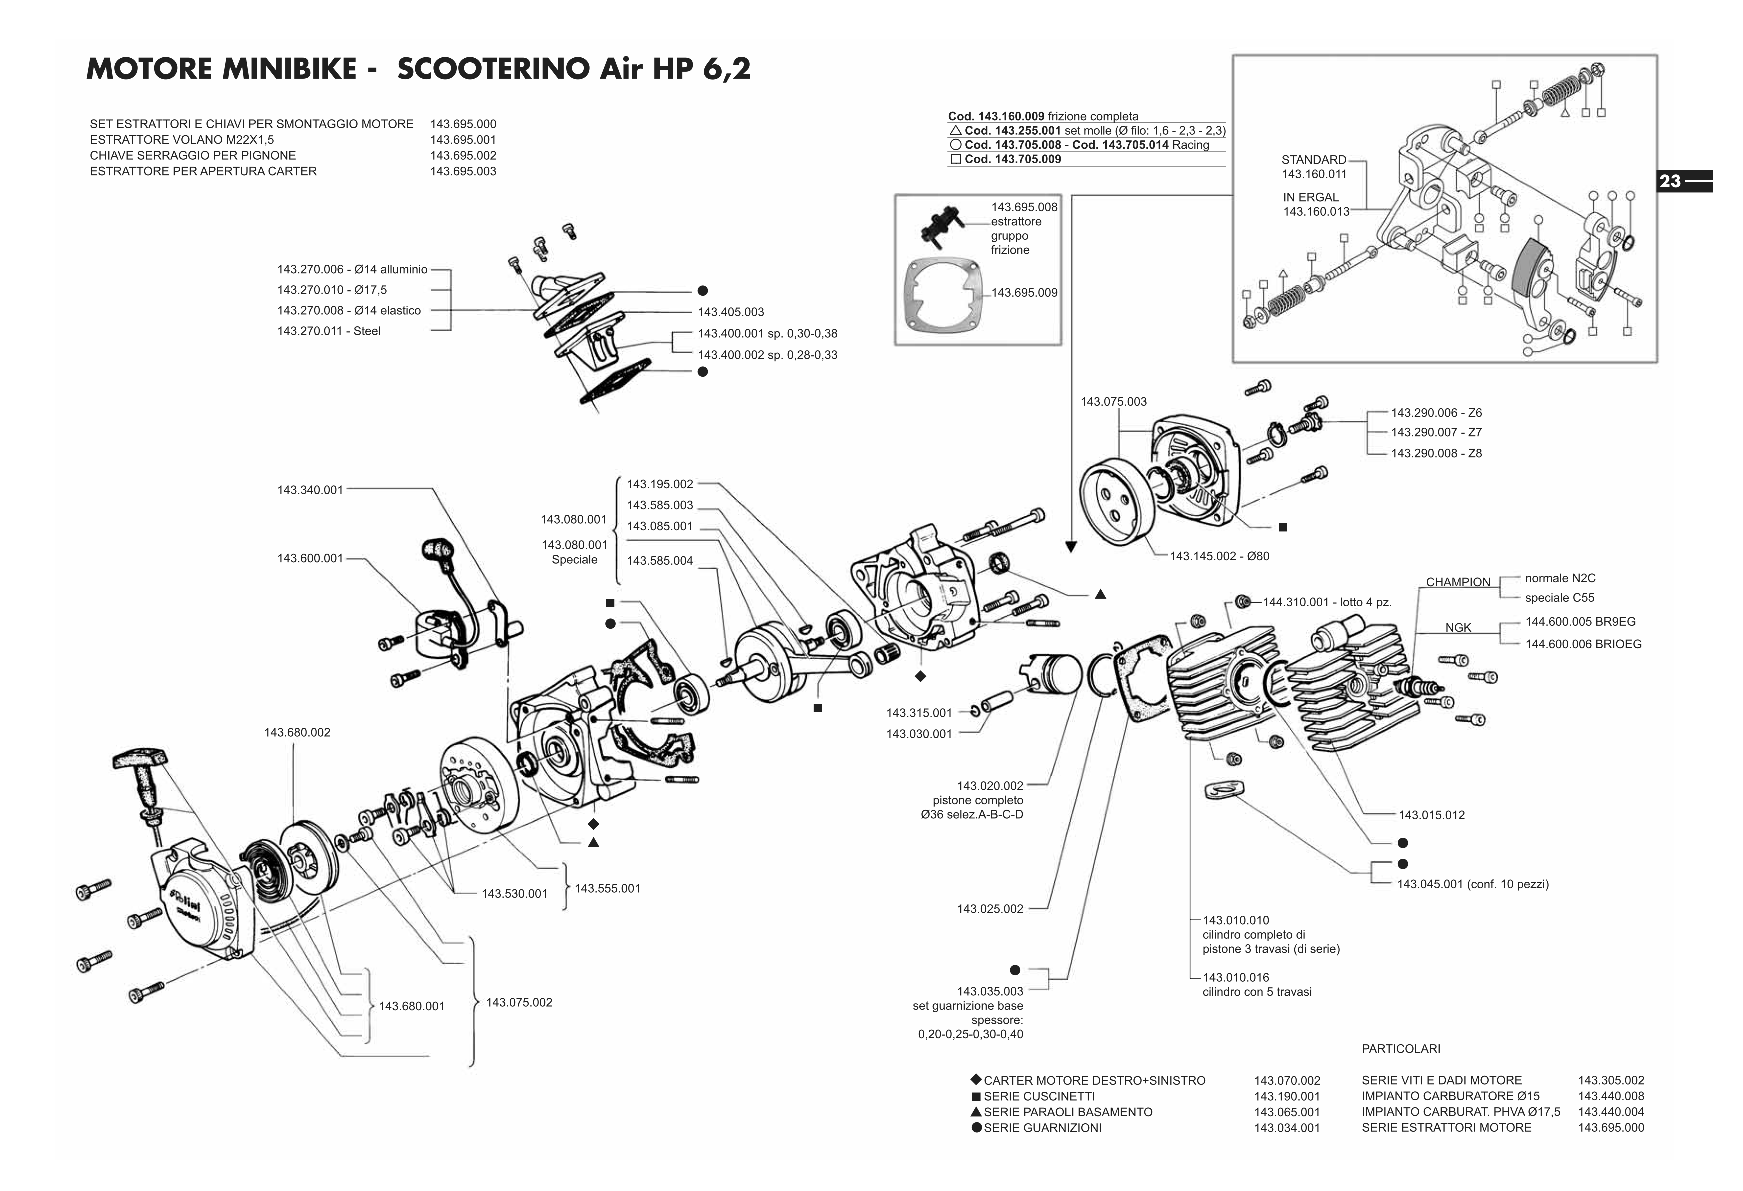 Exploded view Motor (HP 6,2)